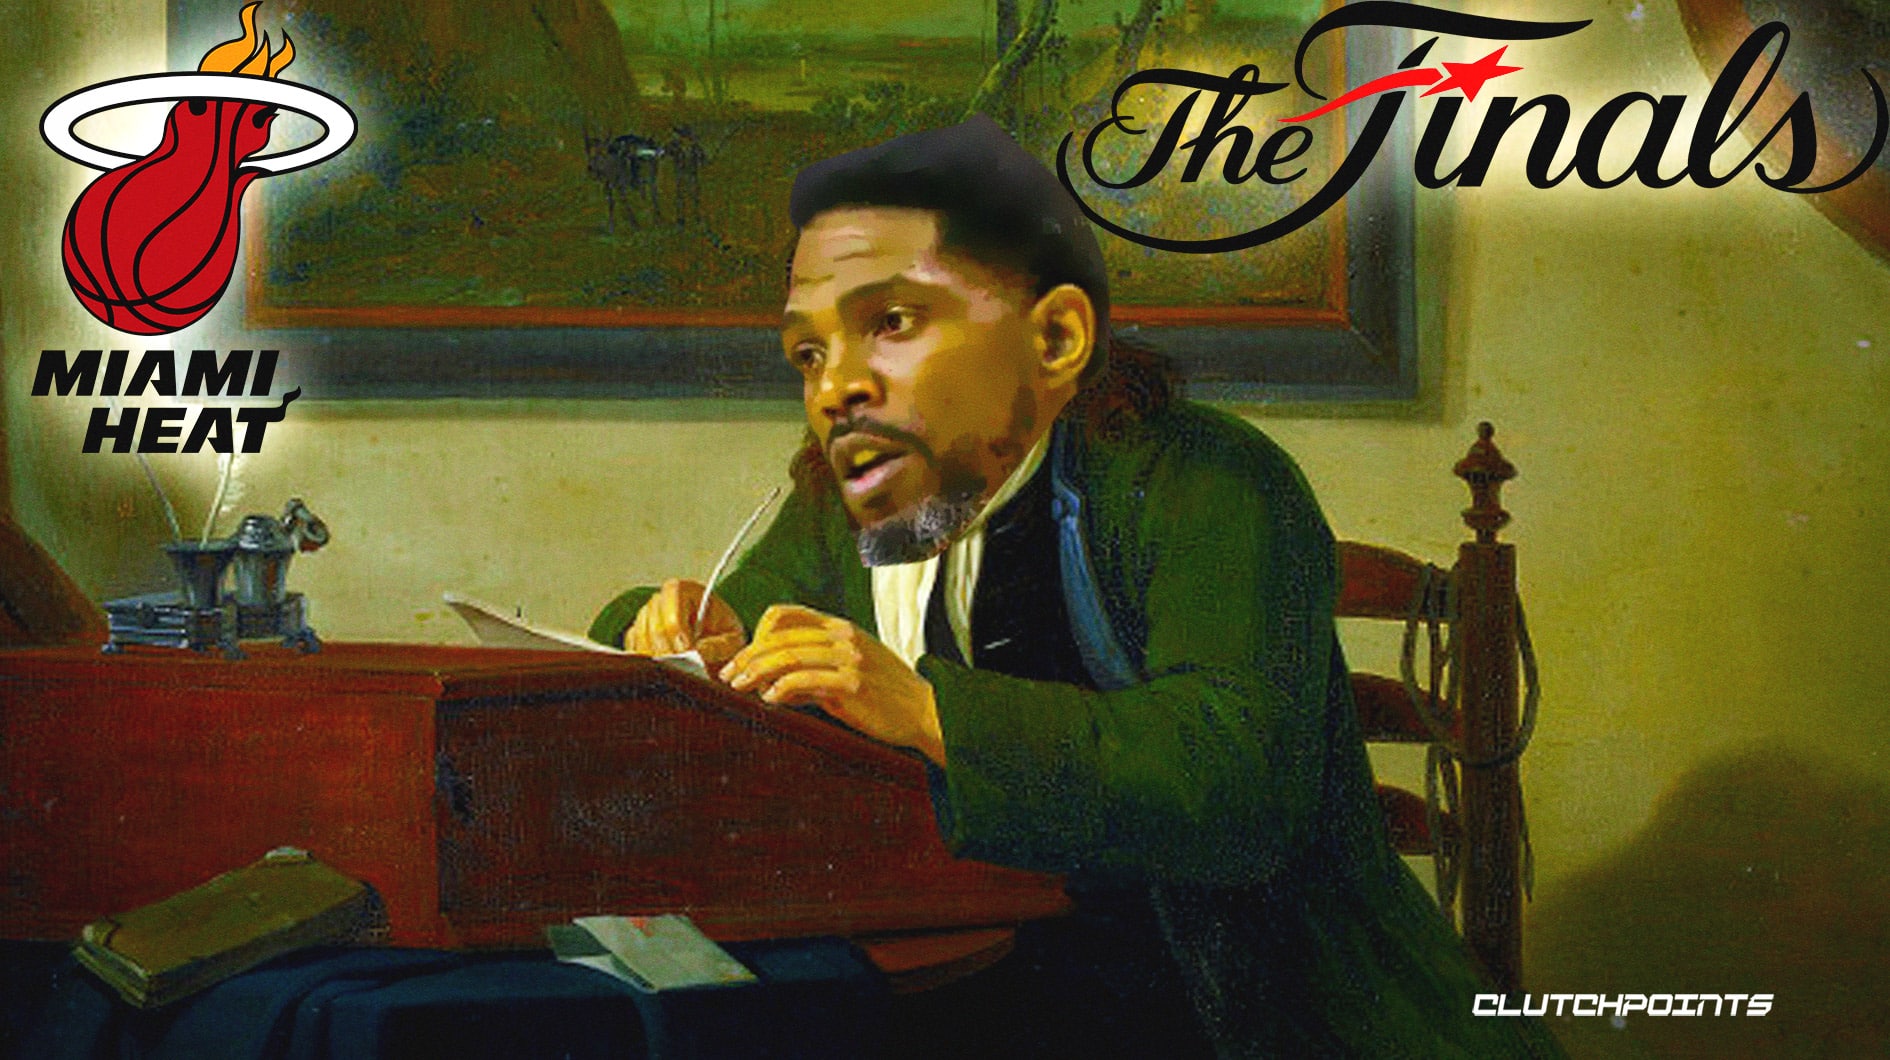 Udonis Haslem becomes the oldest player to ever compete in NBA Finals /  News 